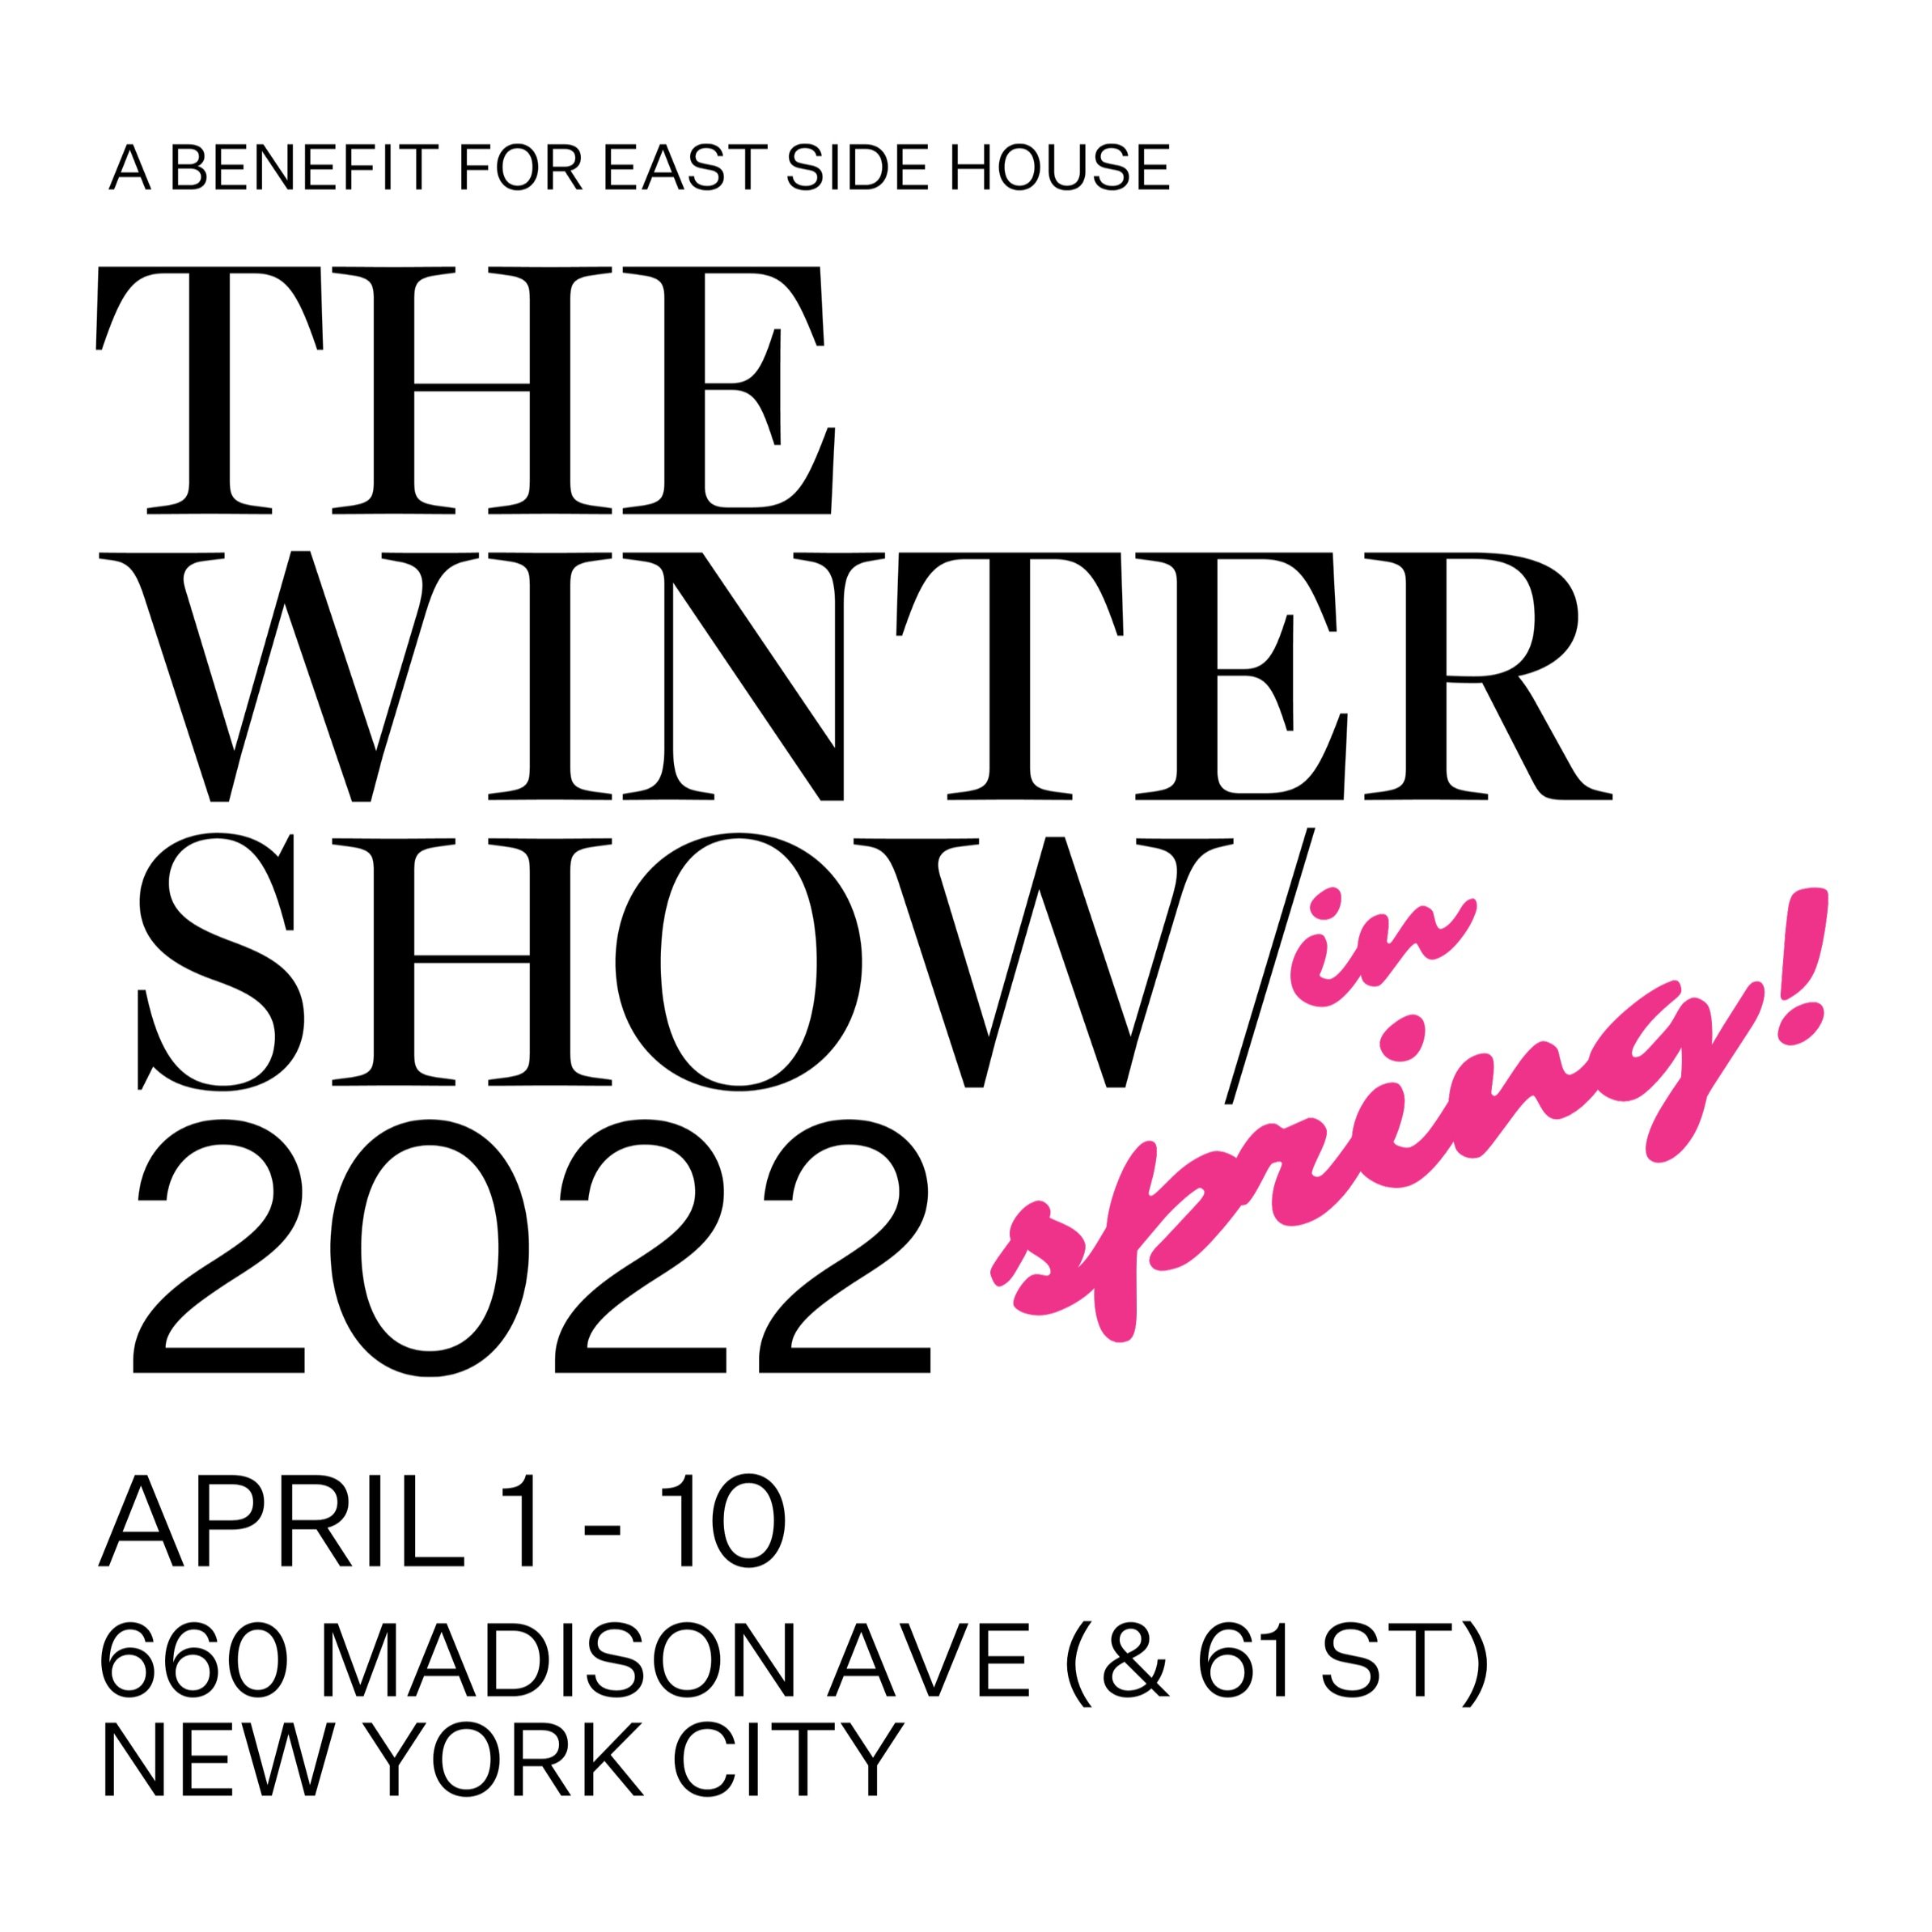 THE WINTER SHOW RETURNS- THIS YEAR IN THE SPRING: April 1-10